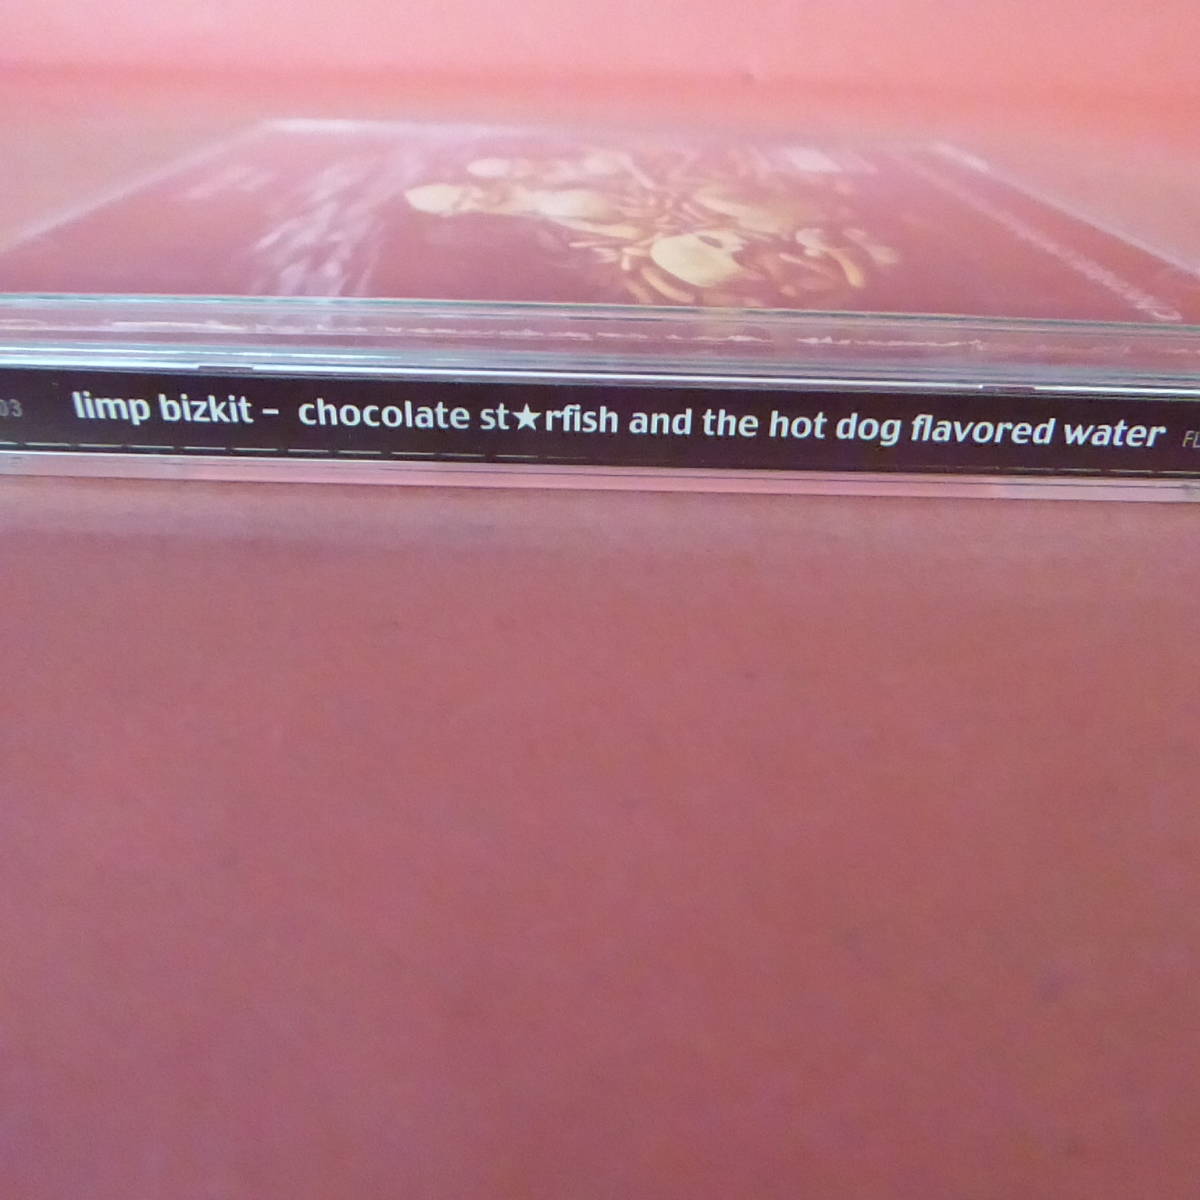 CD1-231121☆limp bizkit - chocolate st★rfish and the hot dog flavored water CD　ボーナスCD付き　帯付き_画像3